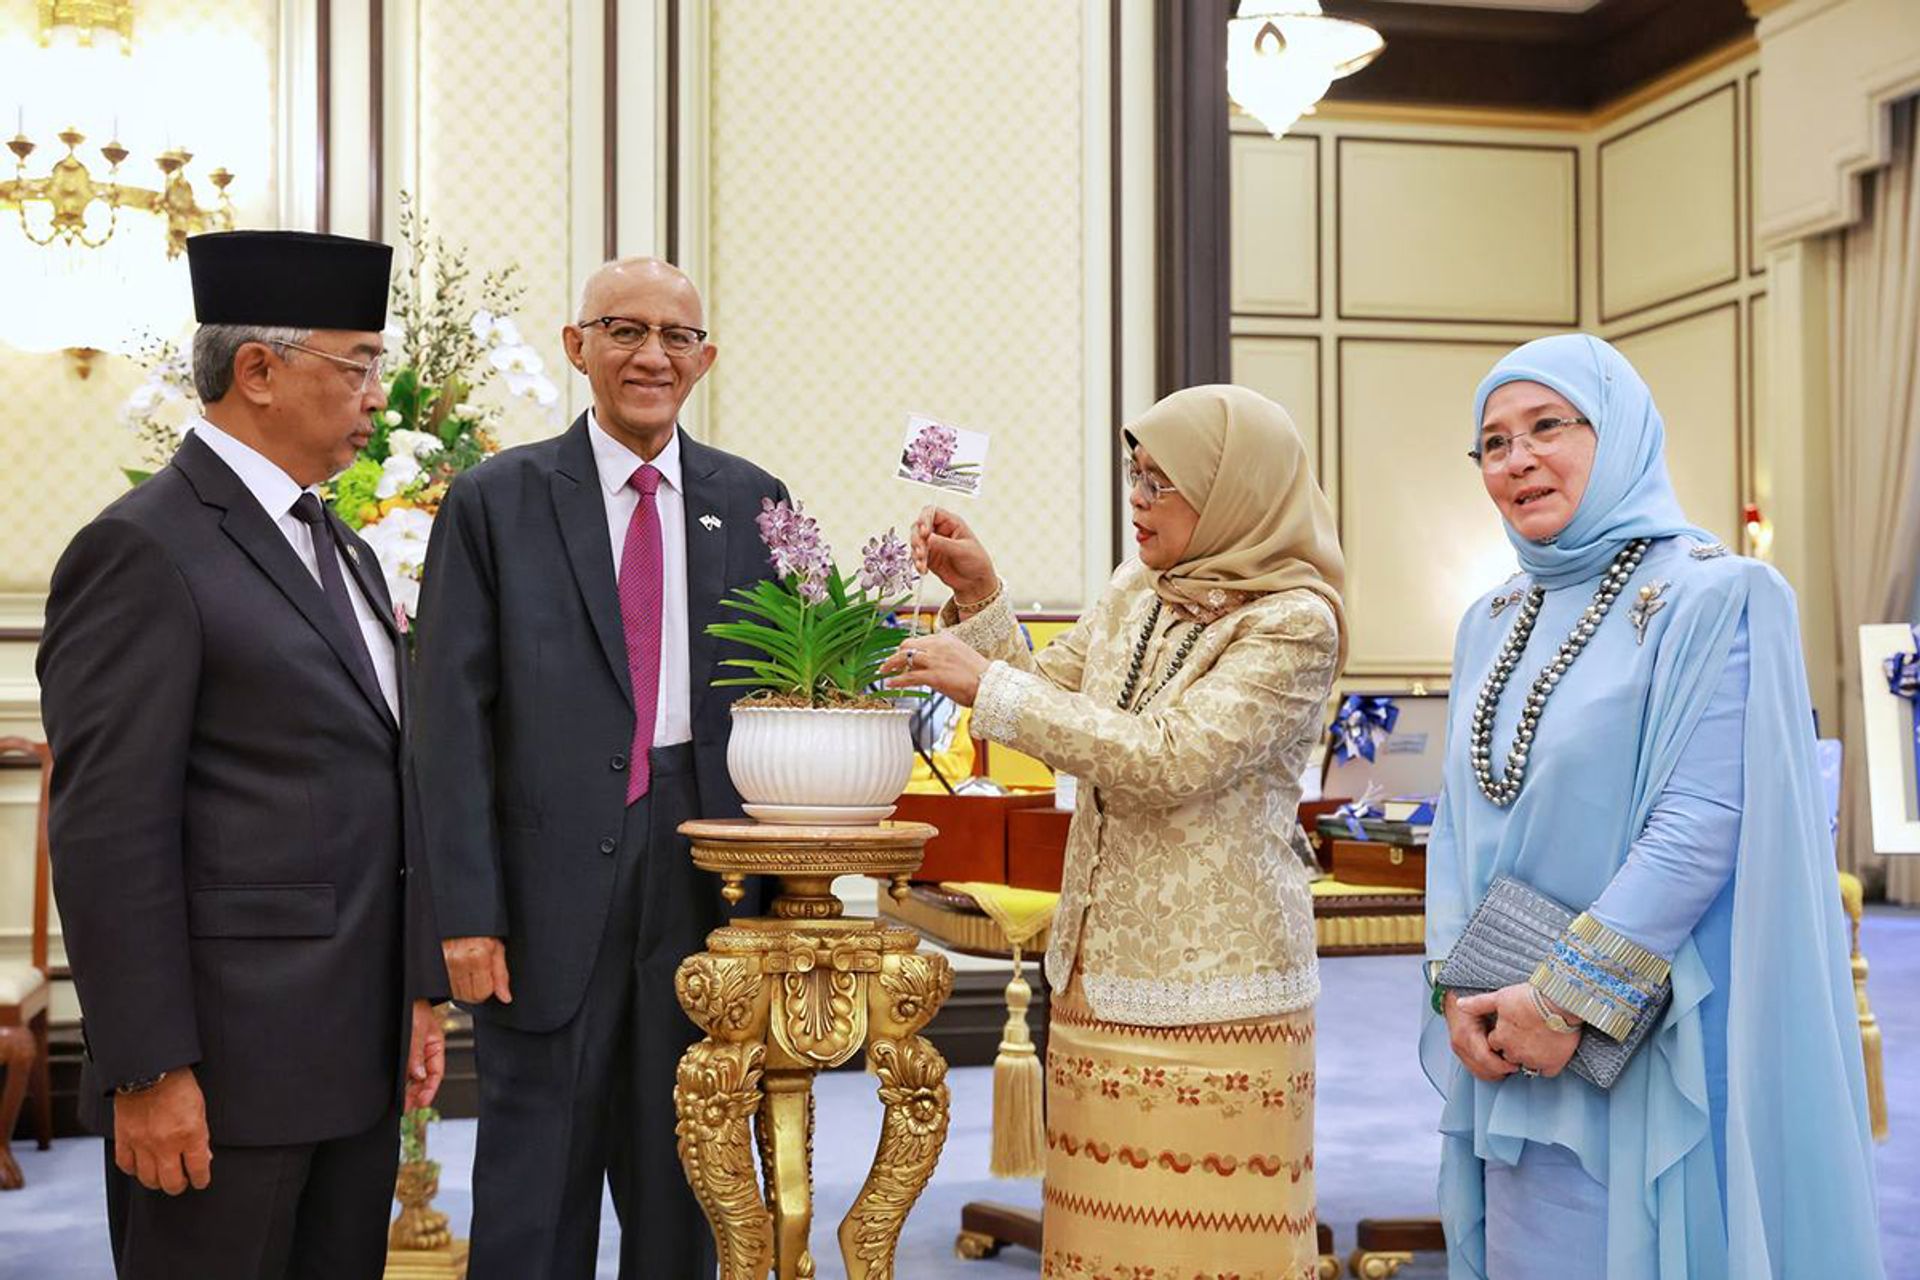 President Halimah and her husband, Mr Mohamed Abdullah Alhabshee, at an orchid naming ceremony with Malaysia’s King, Sultan Abdullah Ahmad Shah, and his wife, Tunku Azizah Aminah Maimunah Iskandariah, at Istana Negara in Kuala Lumpur on March 21, 2023. ST PHOTO: KEVIN LIM